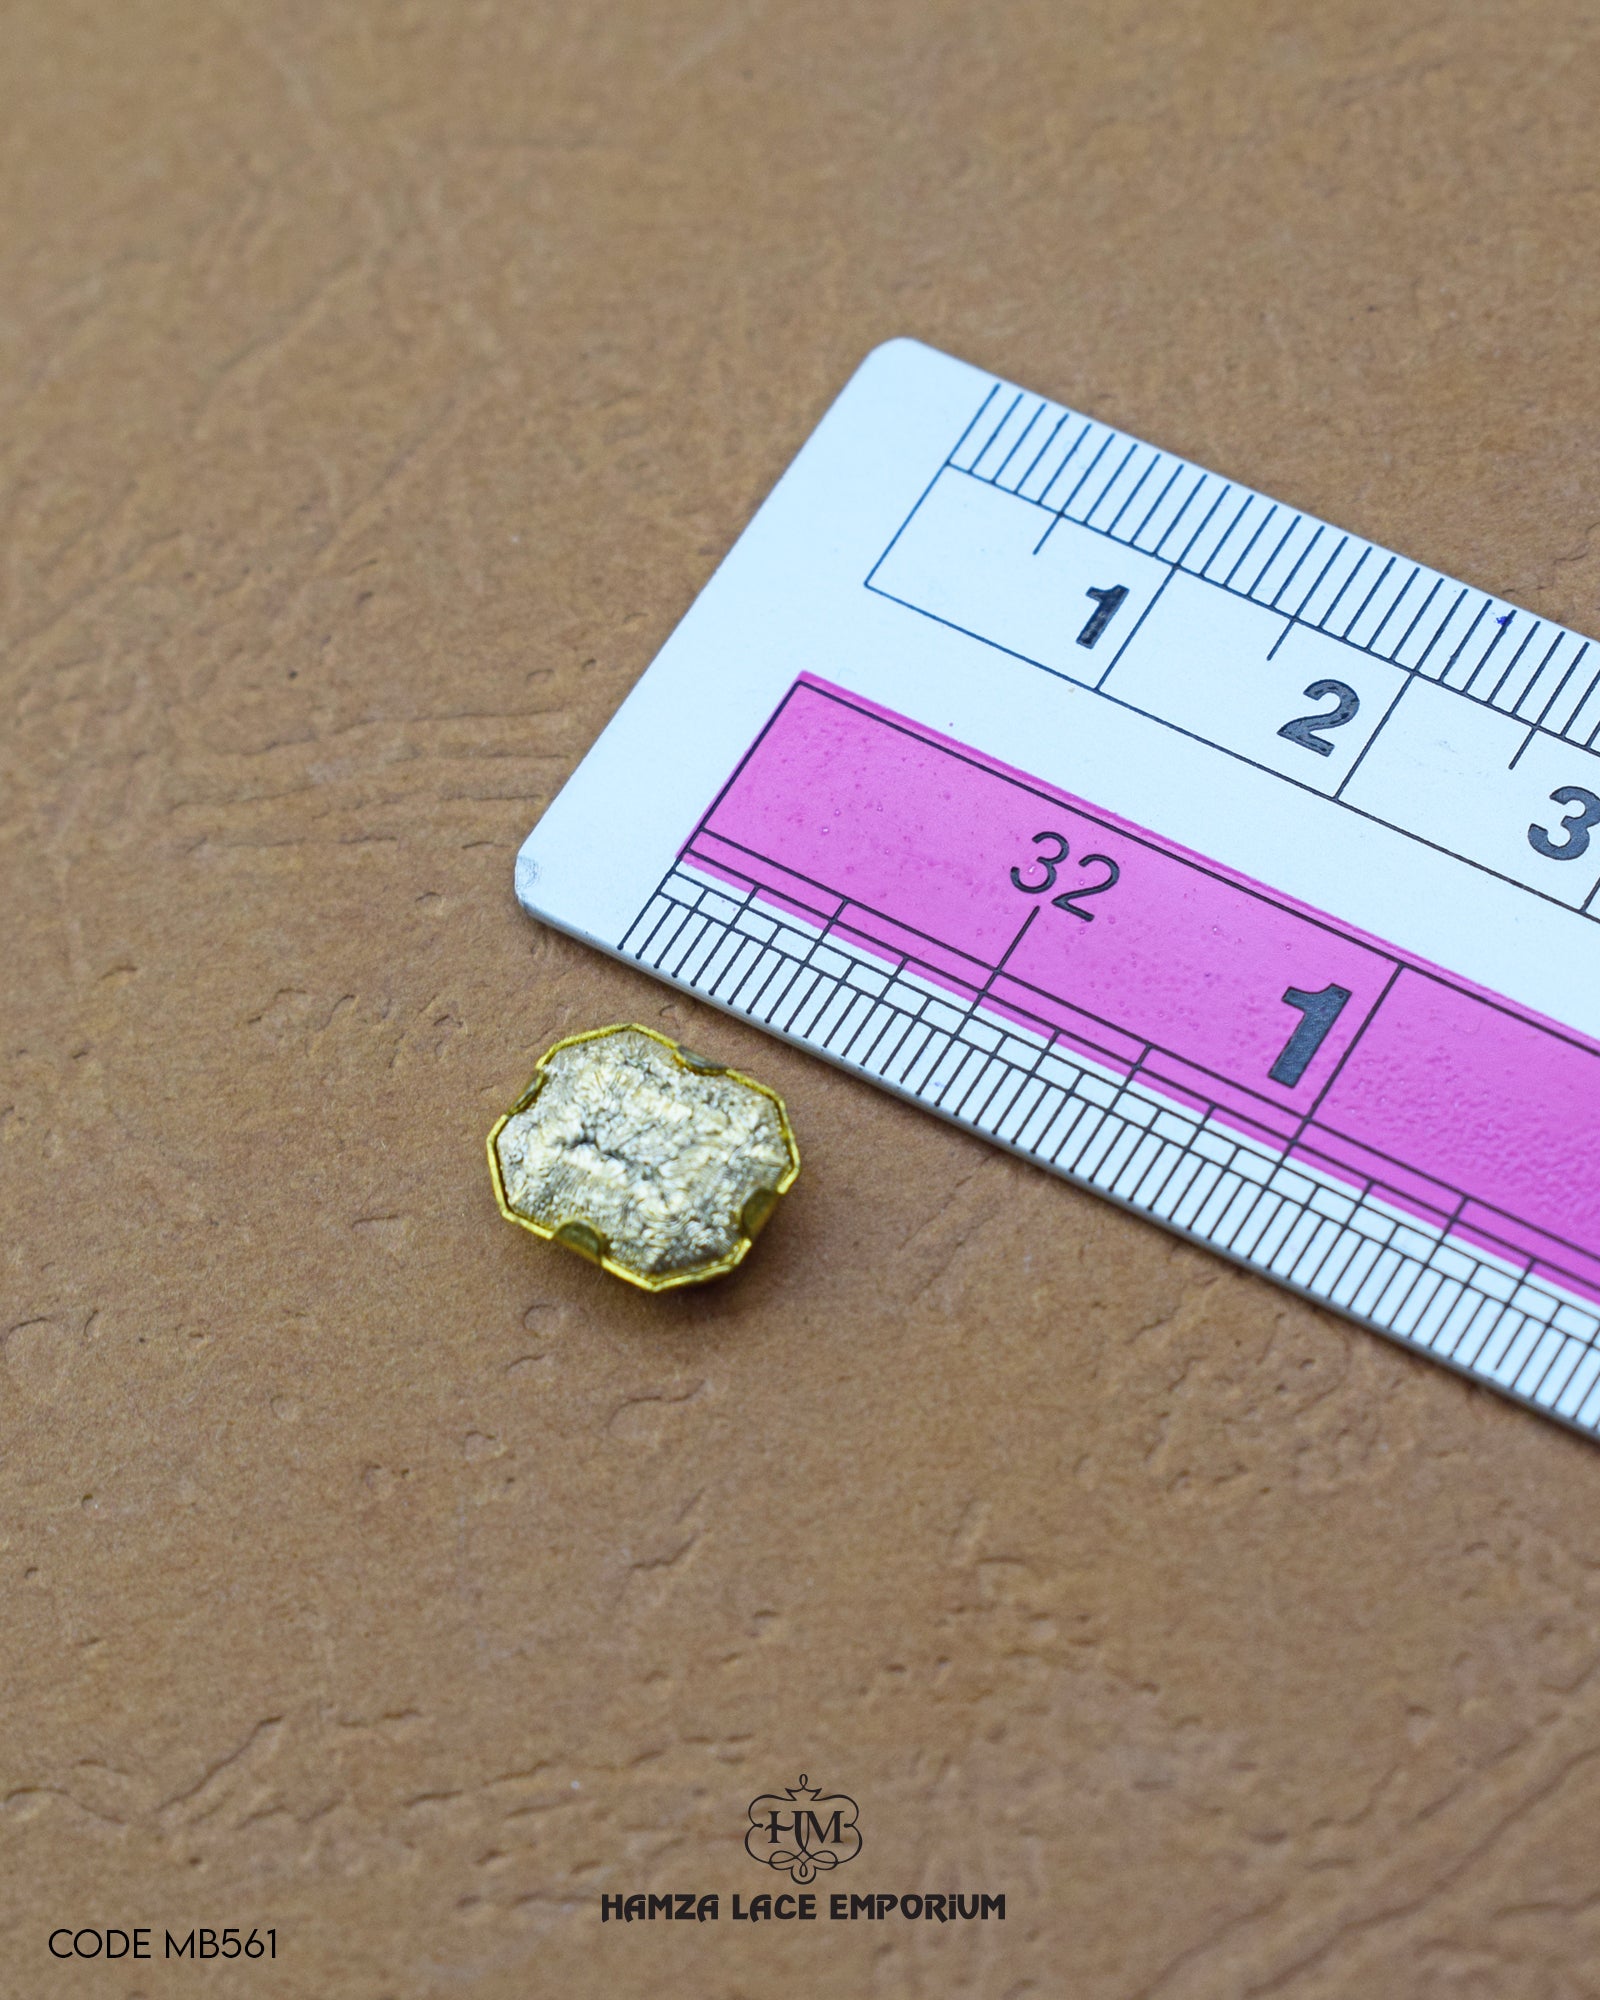 Size of the 'Metal Button MB561' is given with the help of a ruler